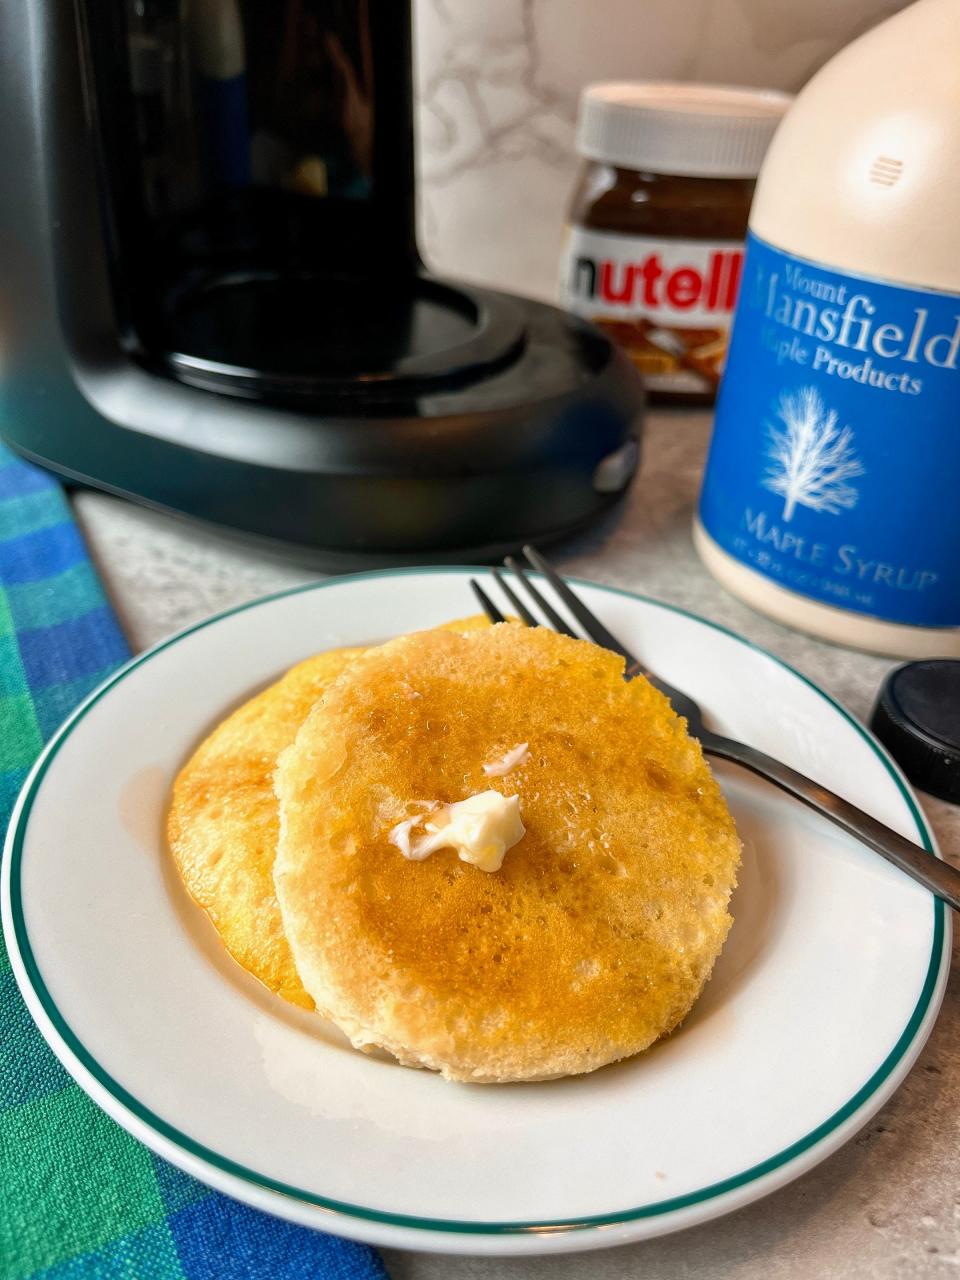 Cook up silver dollar pancakes using a coffee maker.